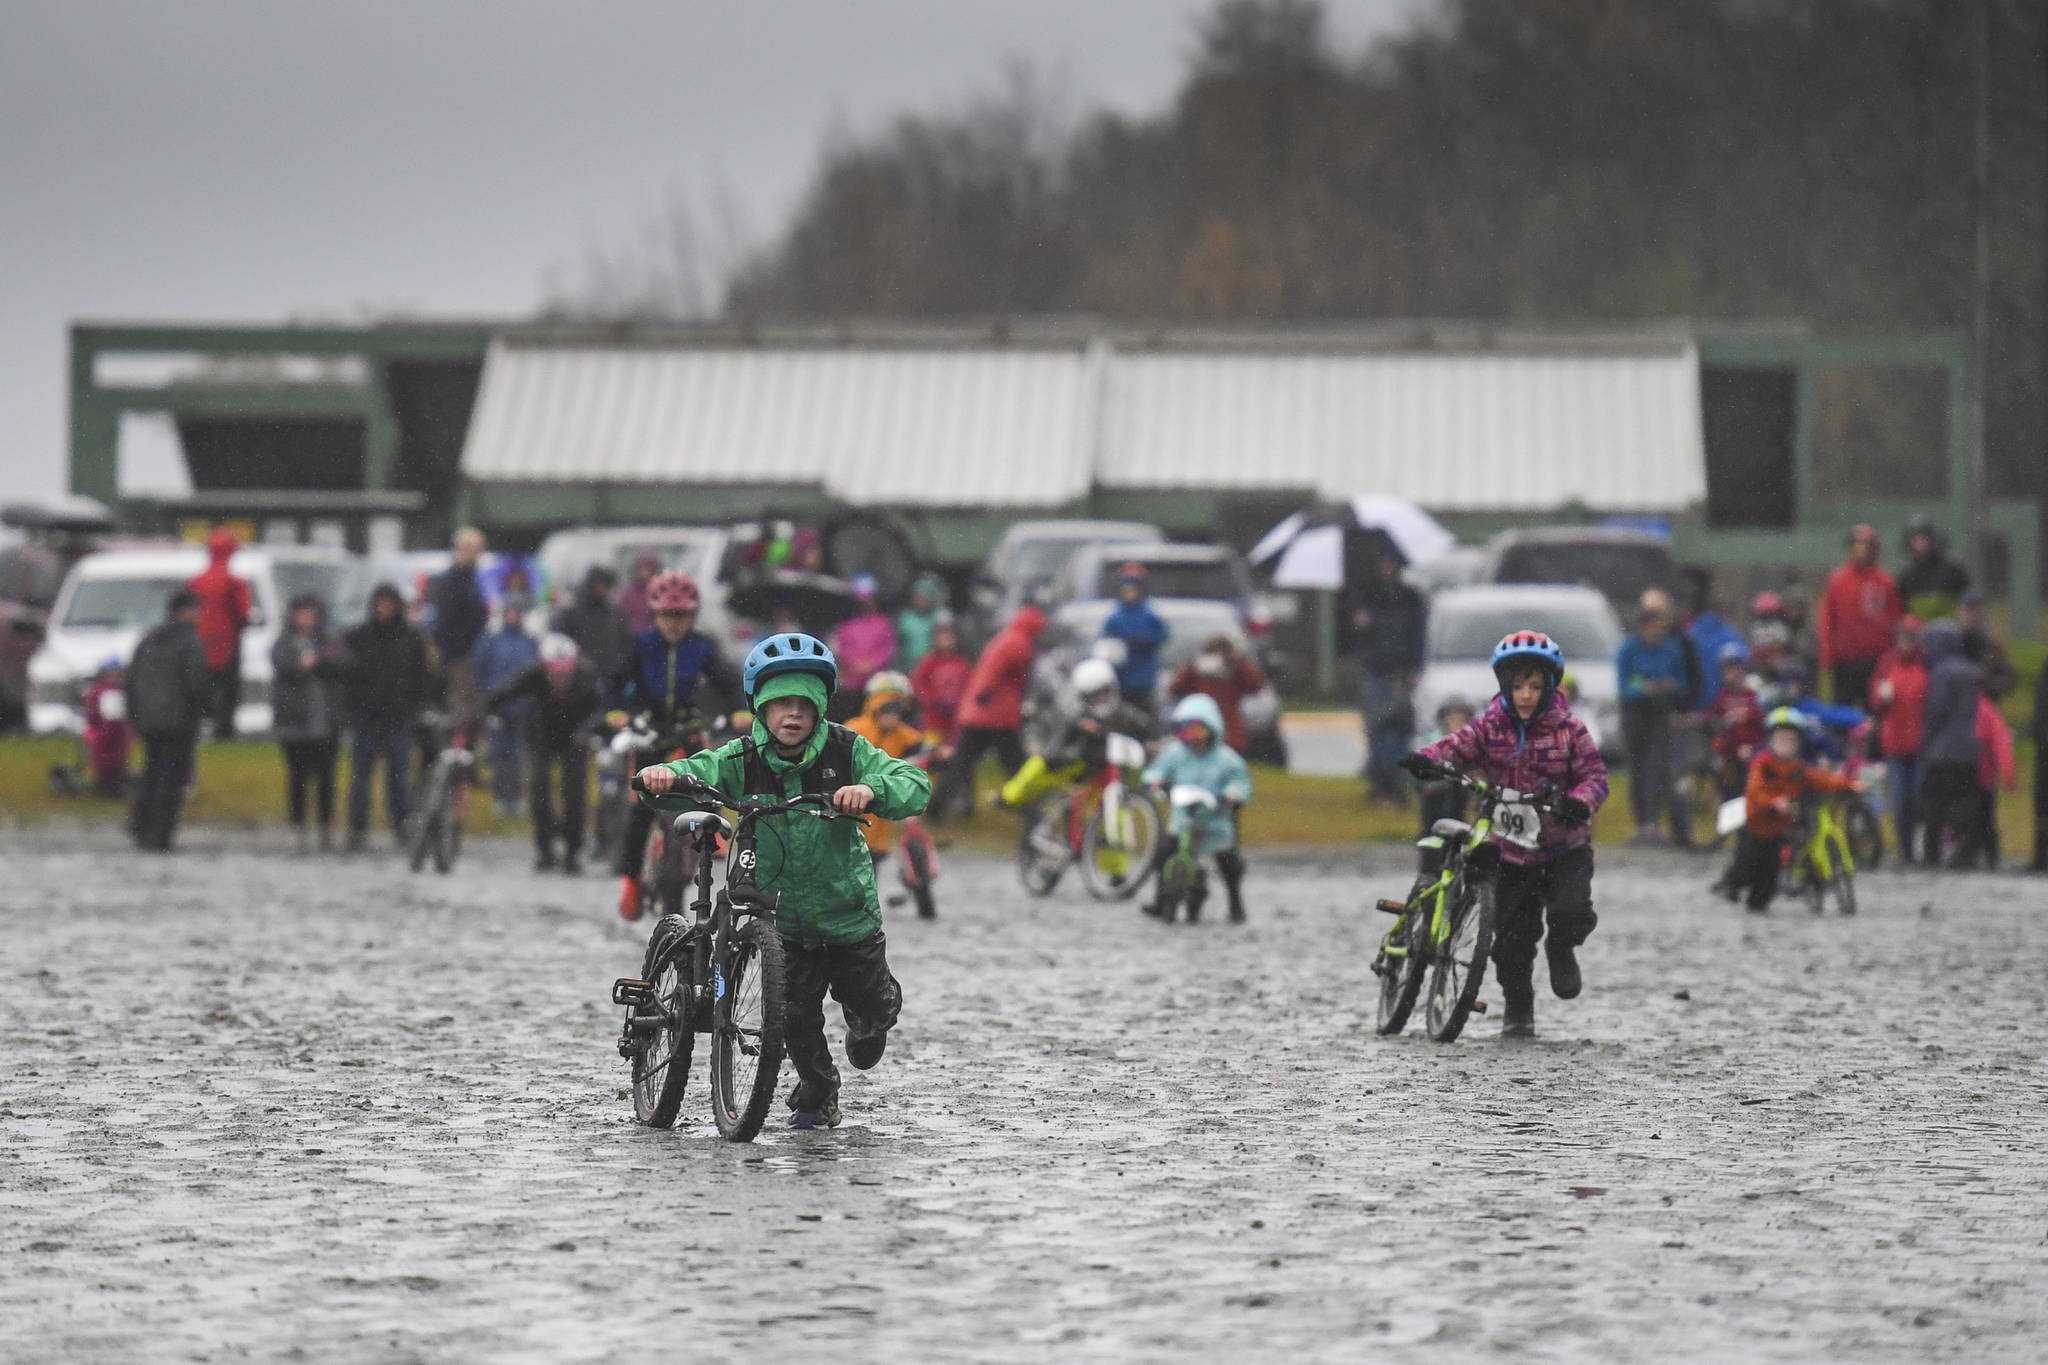 Riders run their bikes across a muddy ball field as the start of the Douglas Dirt Derby Youth Bike Race for 5 to 7-year-olds at Savikko Park and the Treadwell Historic Trail on Saturday, Oct. 5, 2019. The event was organized by the Juneau Freewheelers Bicycle Club. (Michael Penn | Juneau Empire)